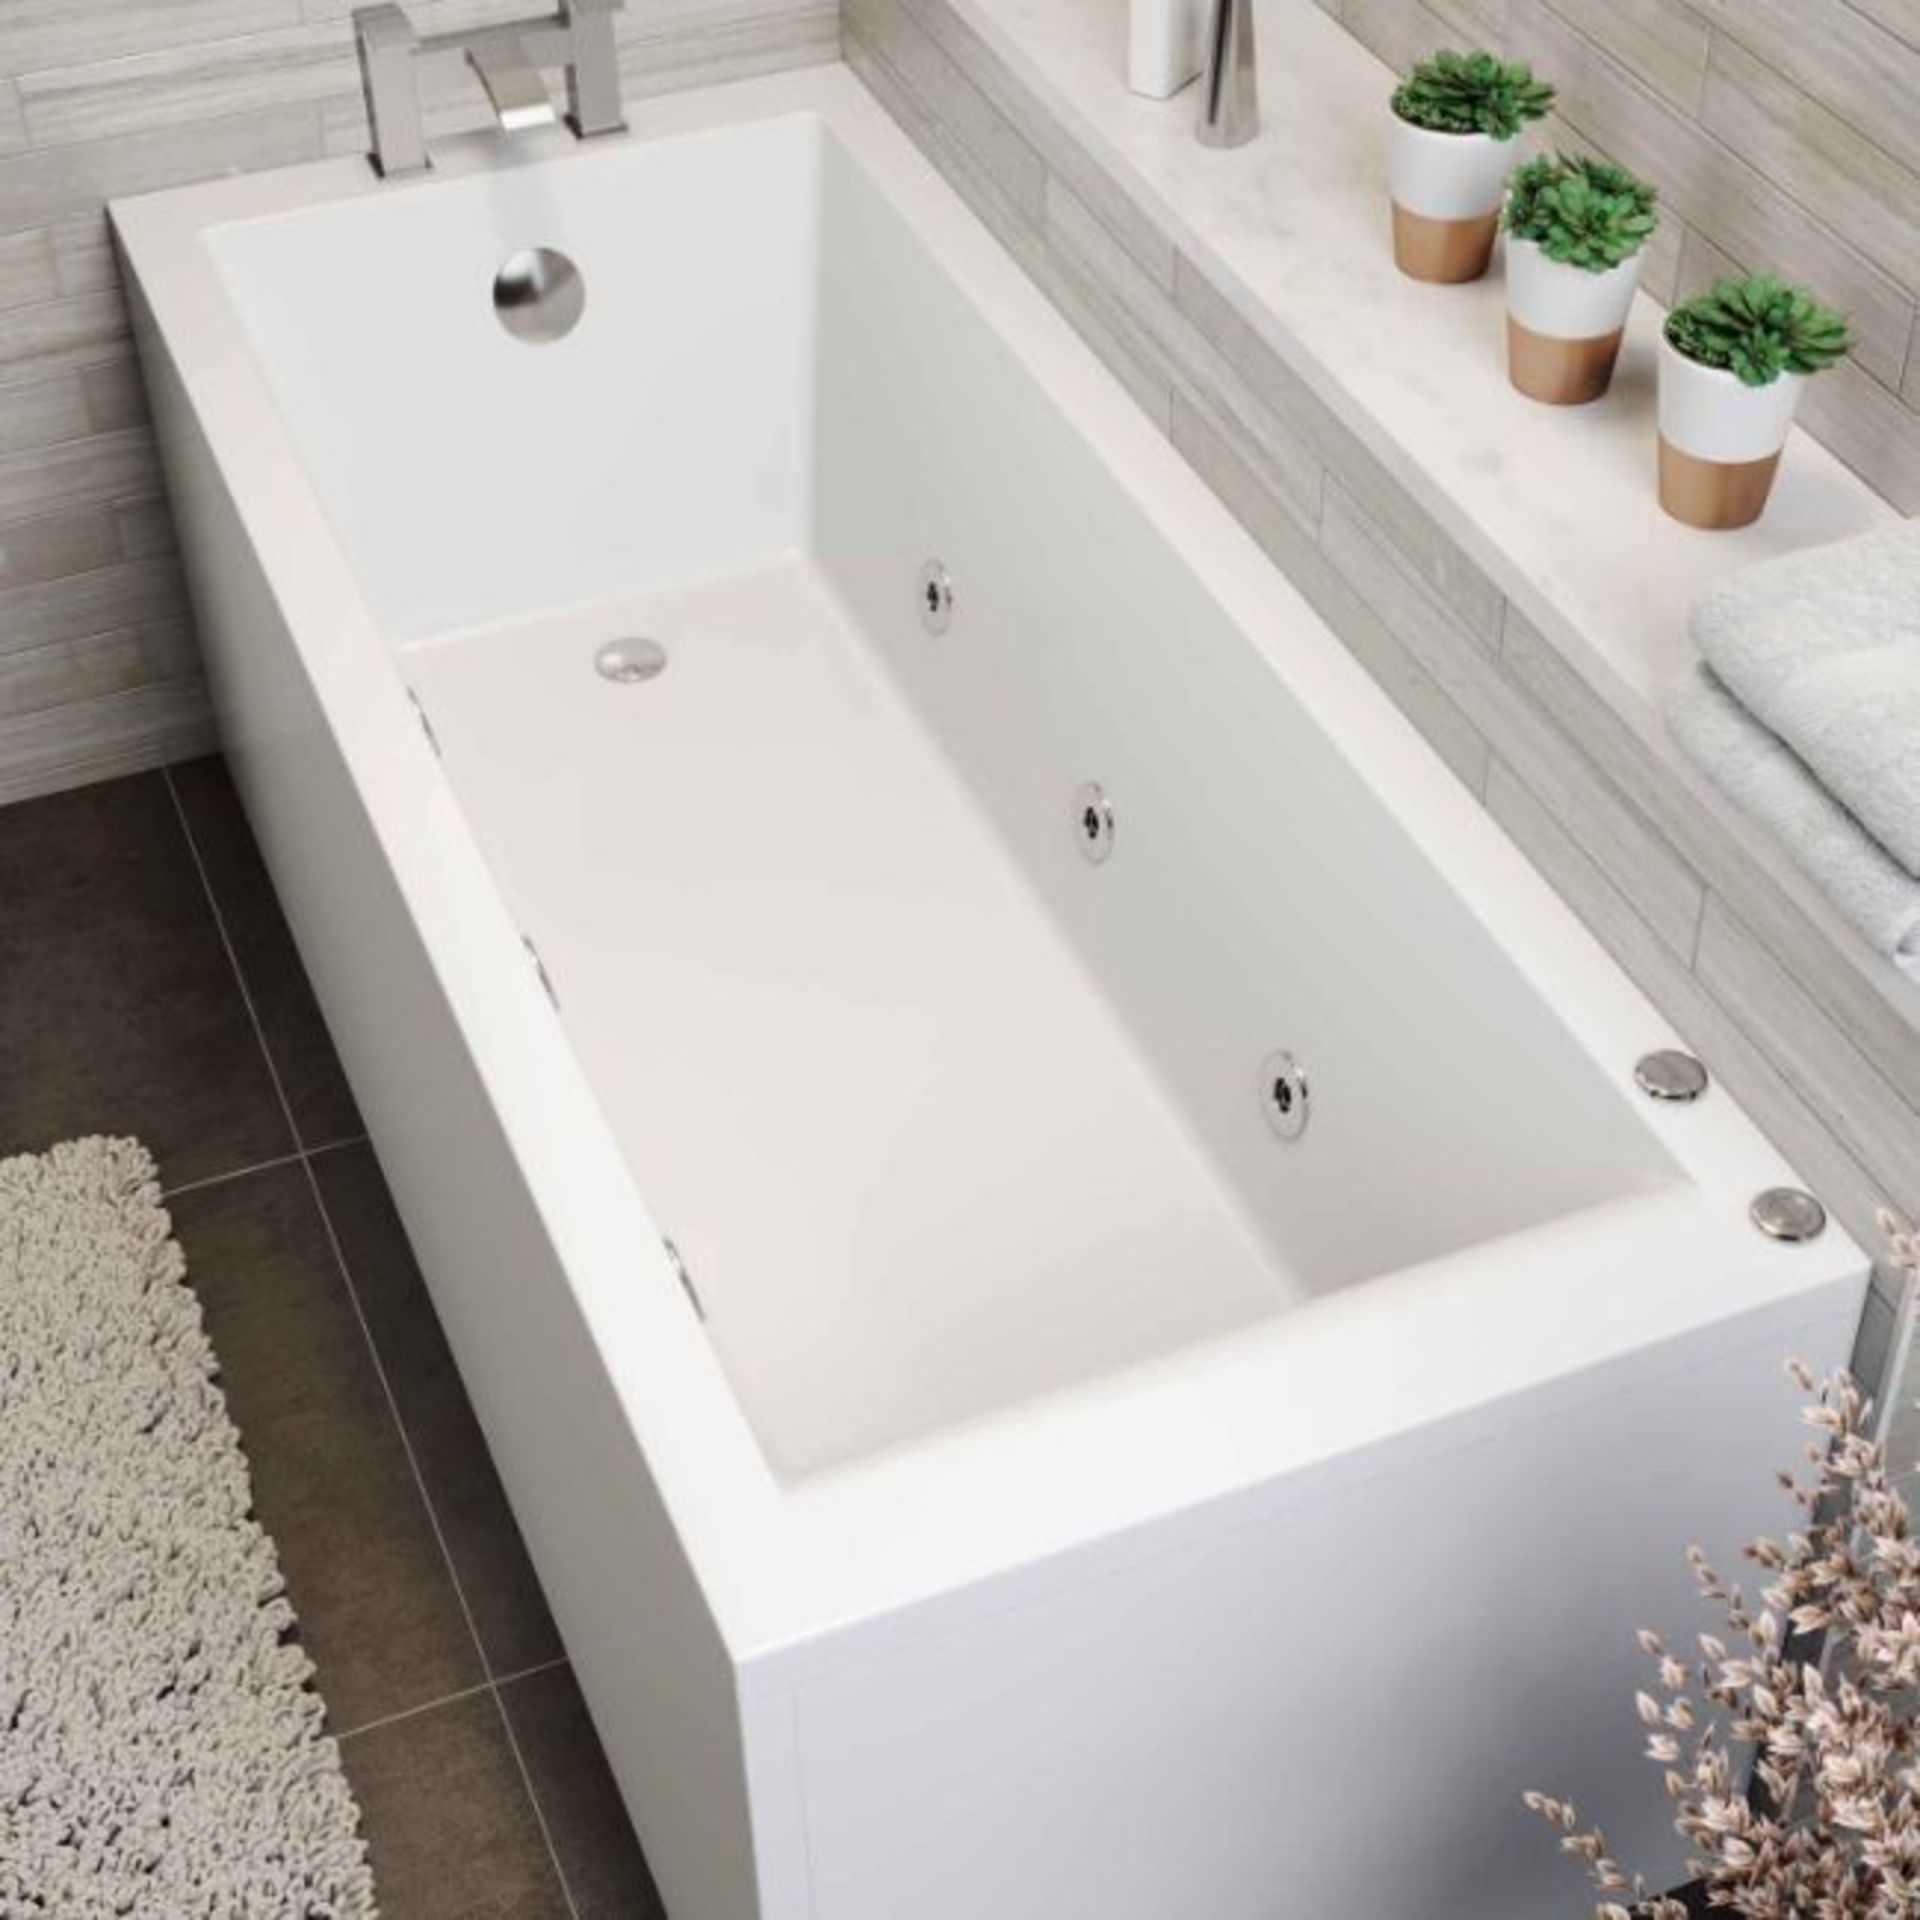 New 1700X700X545mm Whirlpool Jucuzzi Single Ended Bath - 6 Jets. Rrp £1,299.99.Spa Experiance... - Image 2 of 4